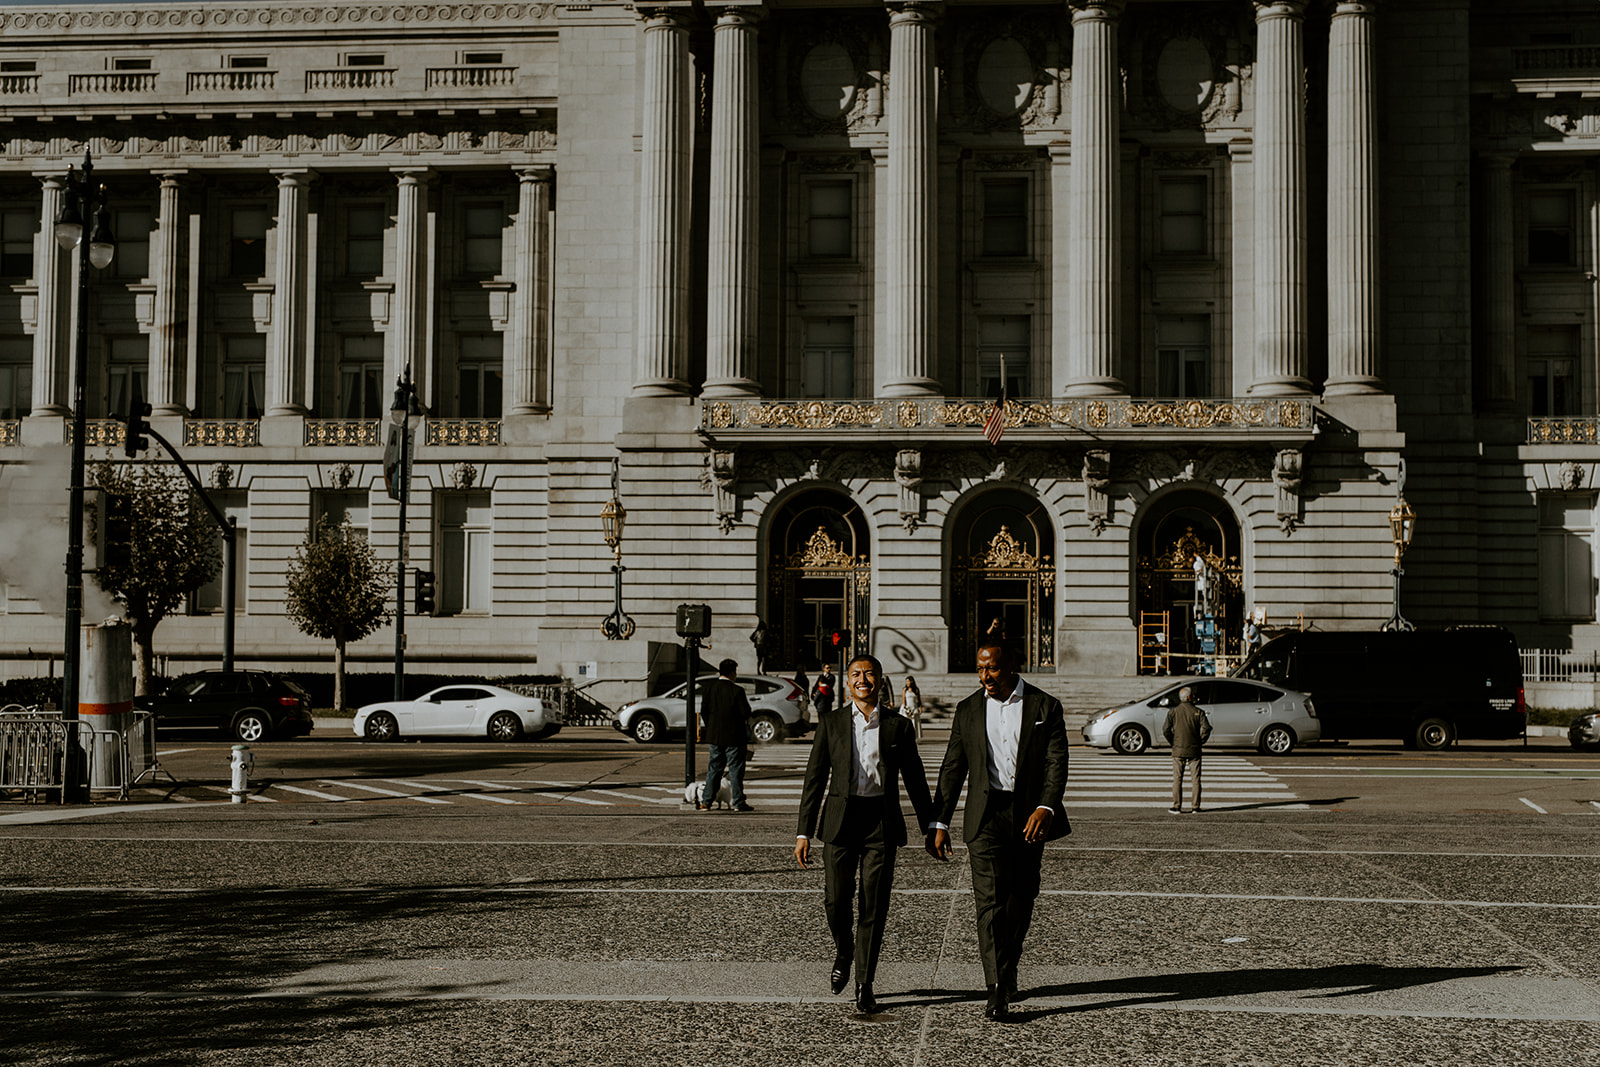 Elopement Photography in San Francisco